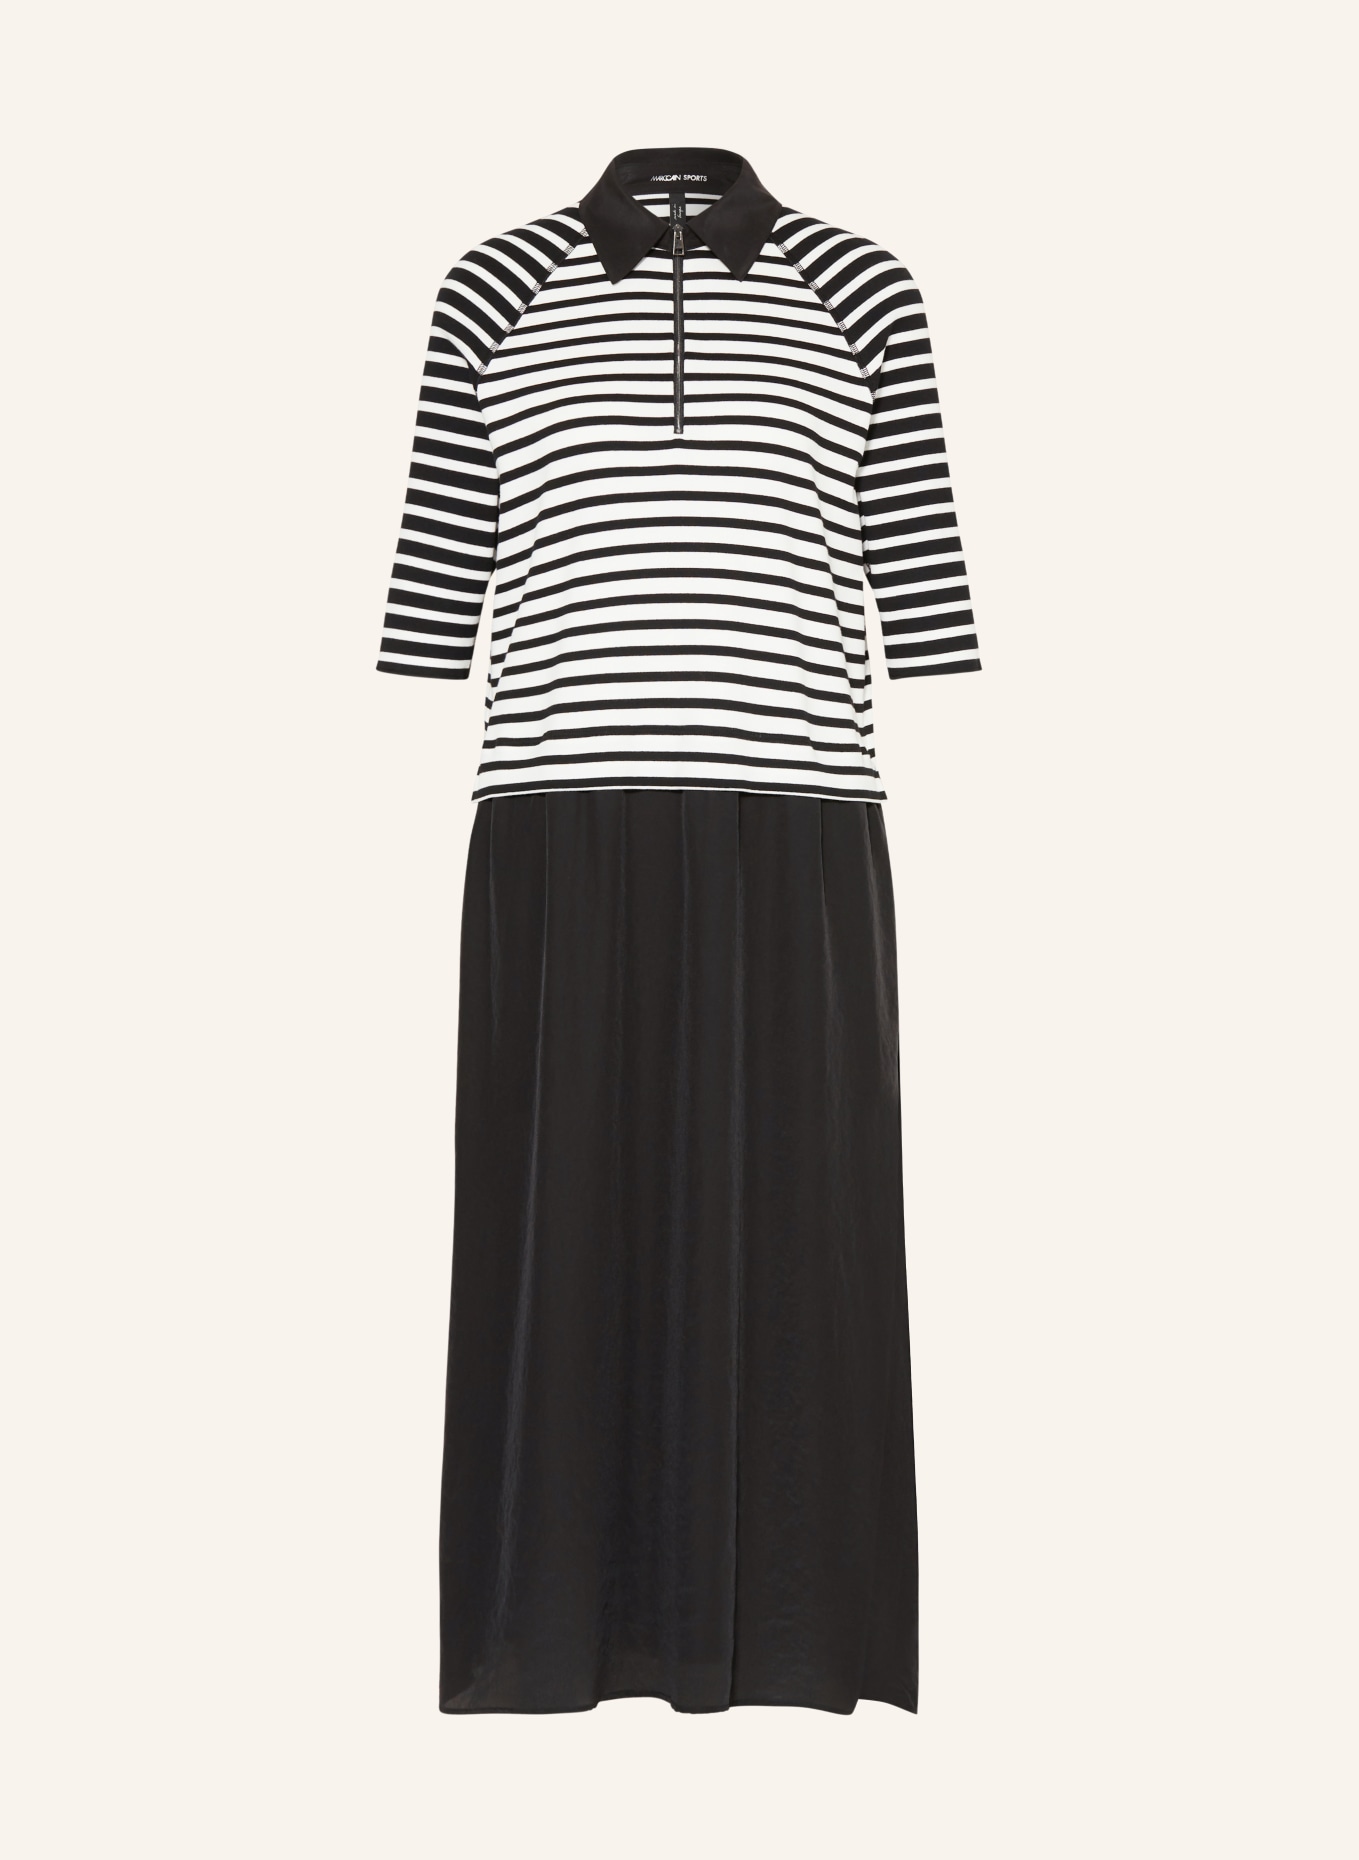 MARC CAIN Jersey polo dress in mixed materials, Color: 910 black and white (Image 1)